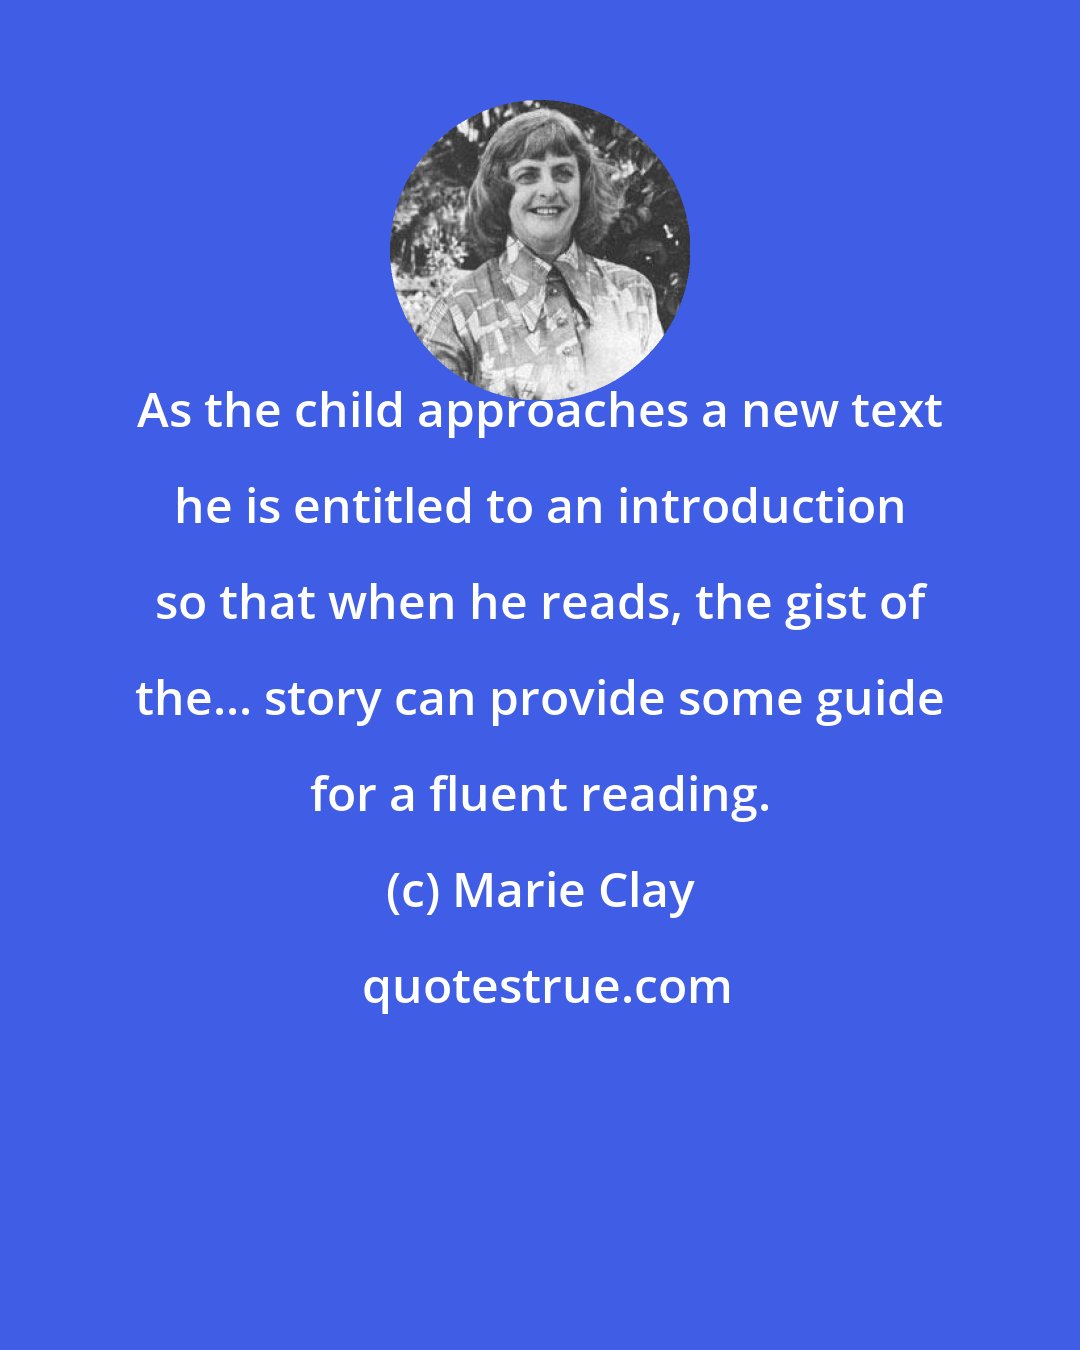 Marie Clay: As the child approaches a new text he is entitled to an introduction so that when he reads, the gist of the... story can provide some guide for a fluent reading.